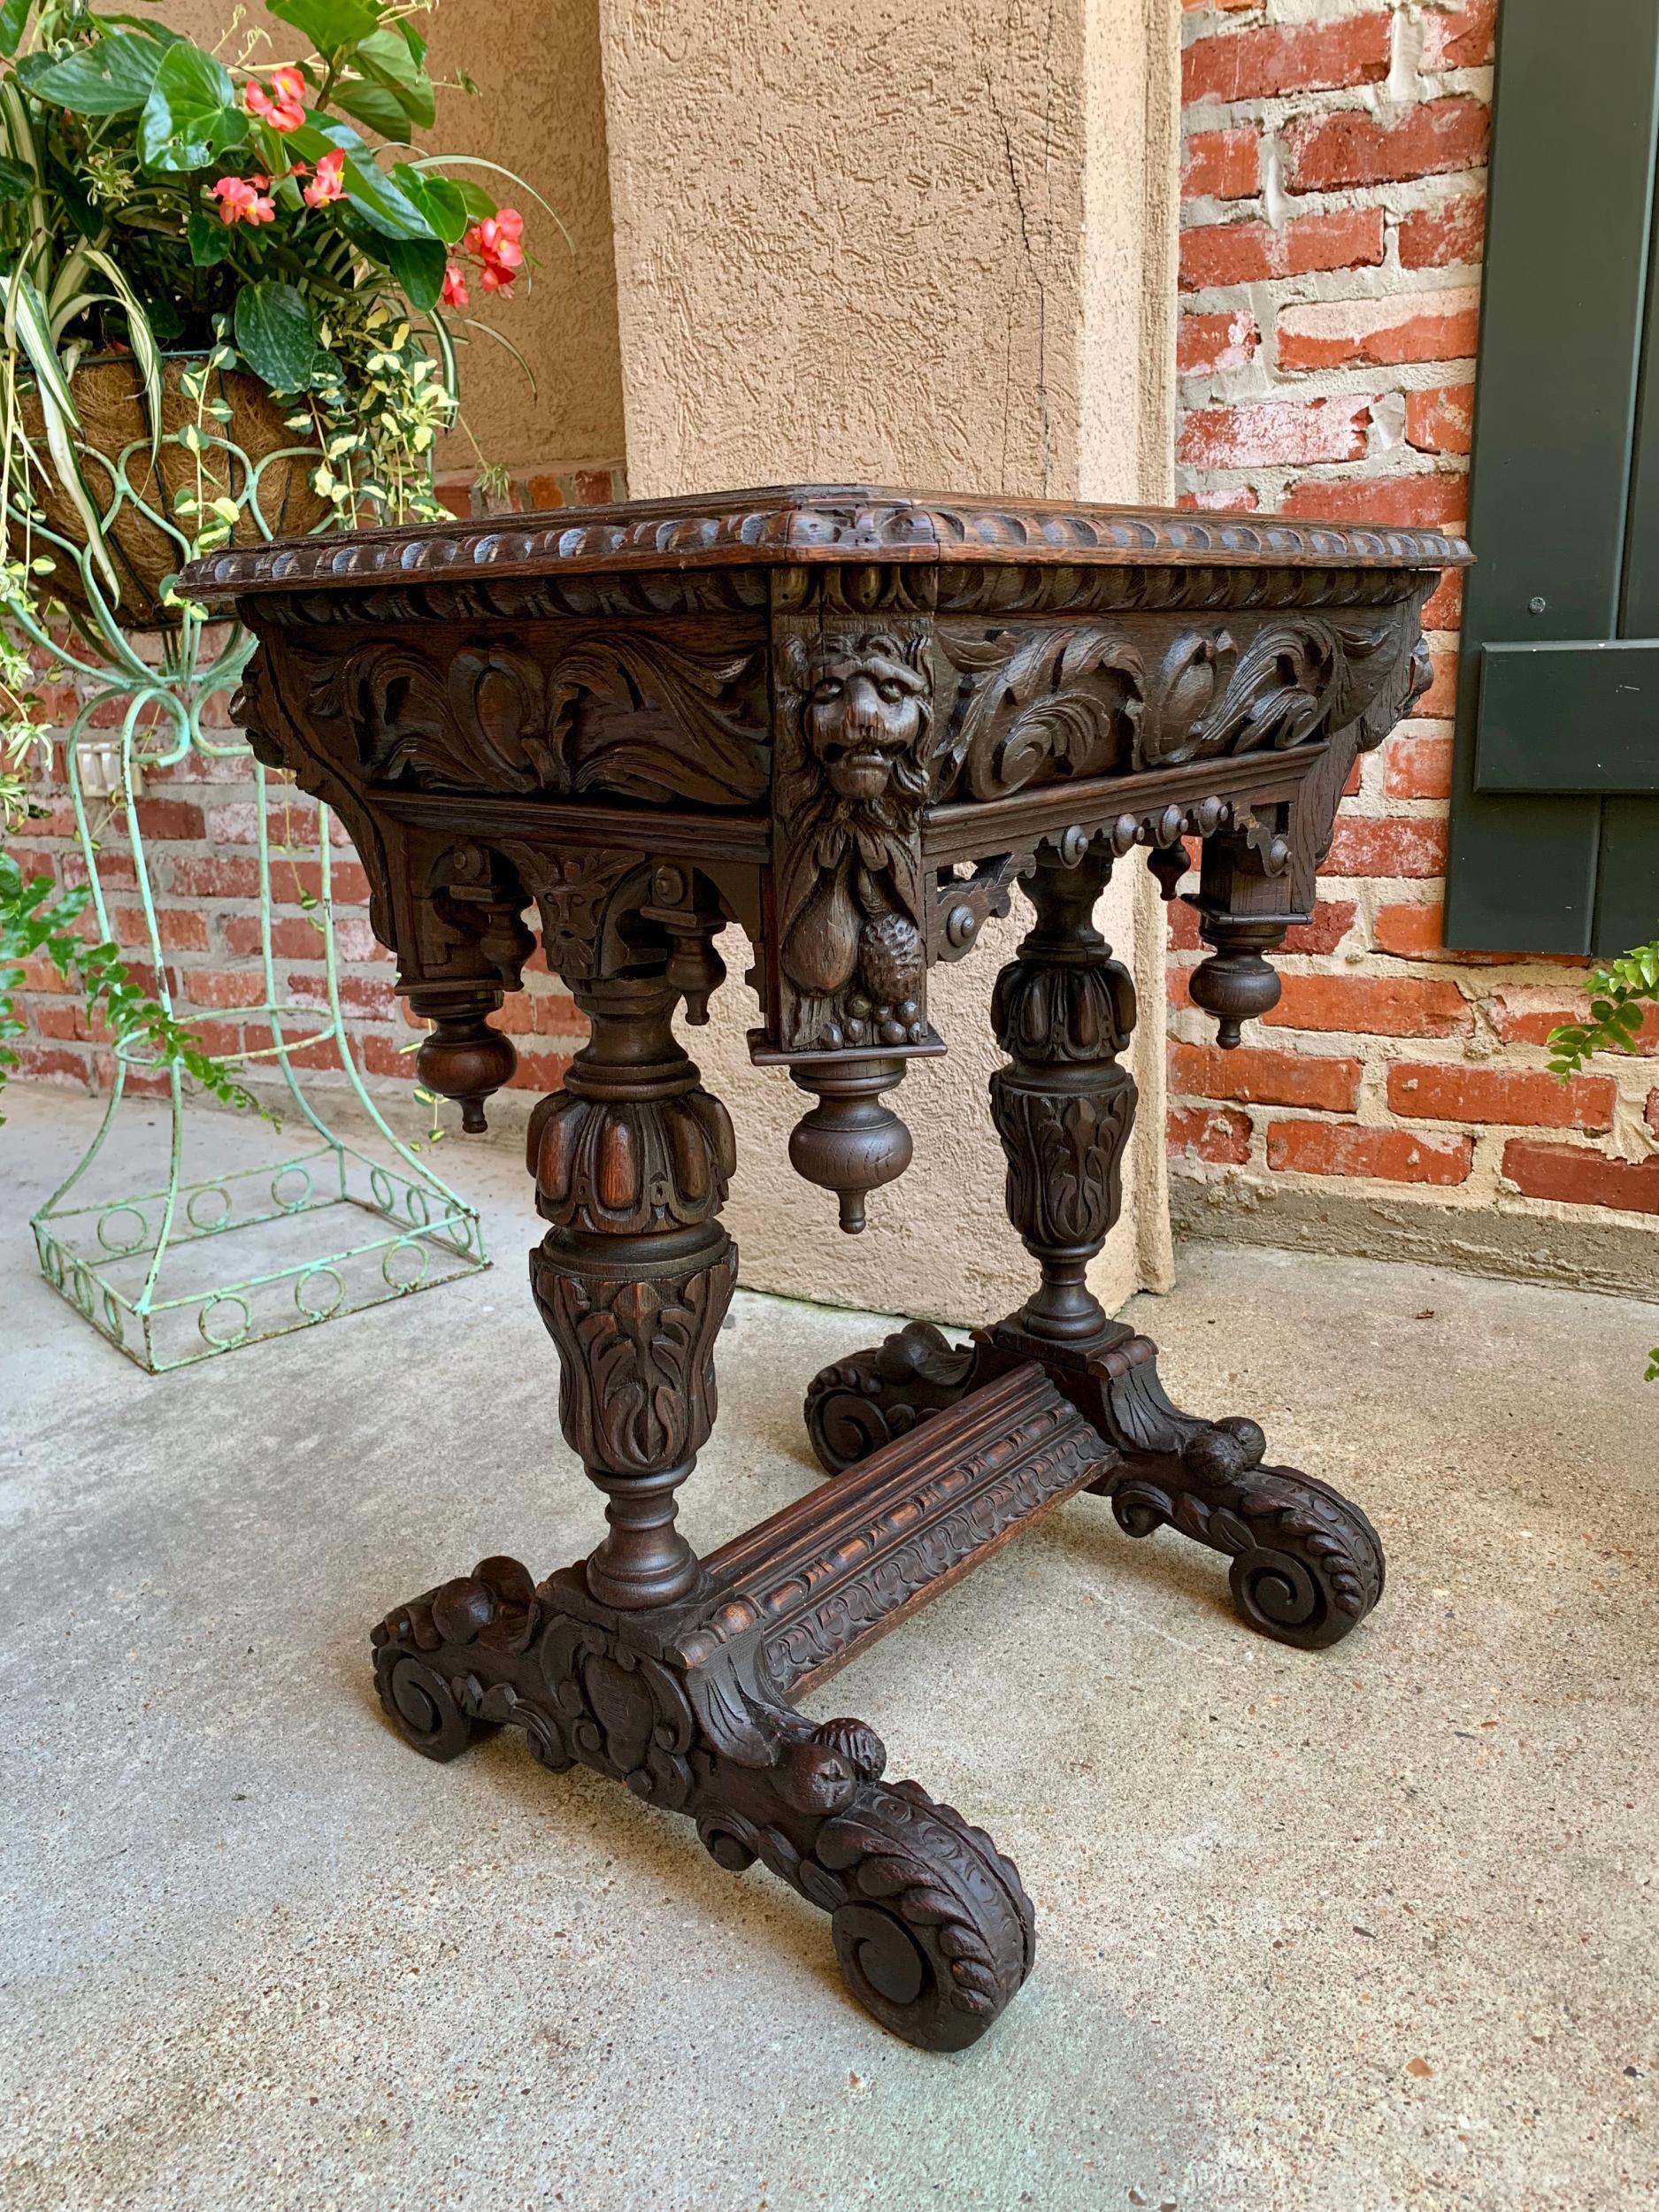 19th century Petite French carved oak sofa side table Renaissance Black Forest

~Direct from France~
~A wonderful antique French carved oak table or “bureau plat” desk~
~Unique, very petite size, yet will all the amazing carved features that we